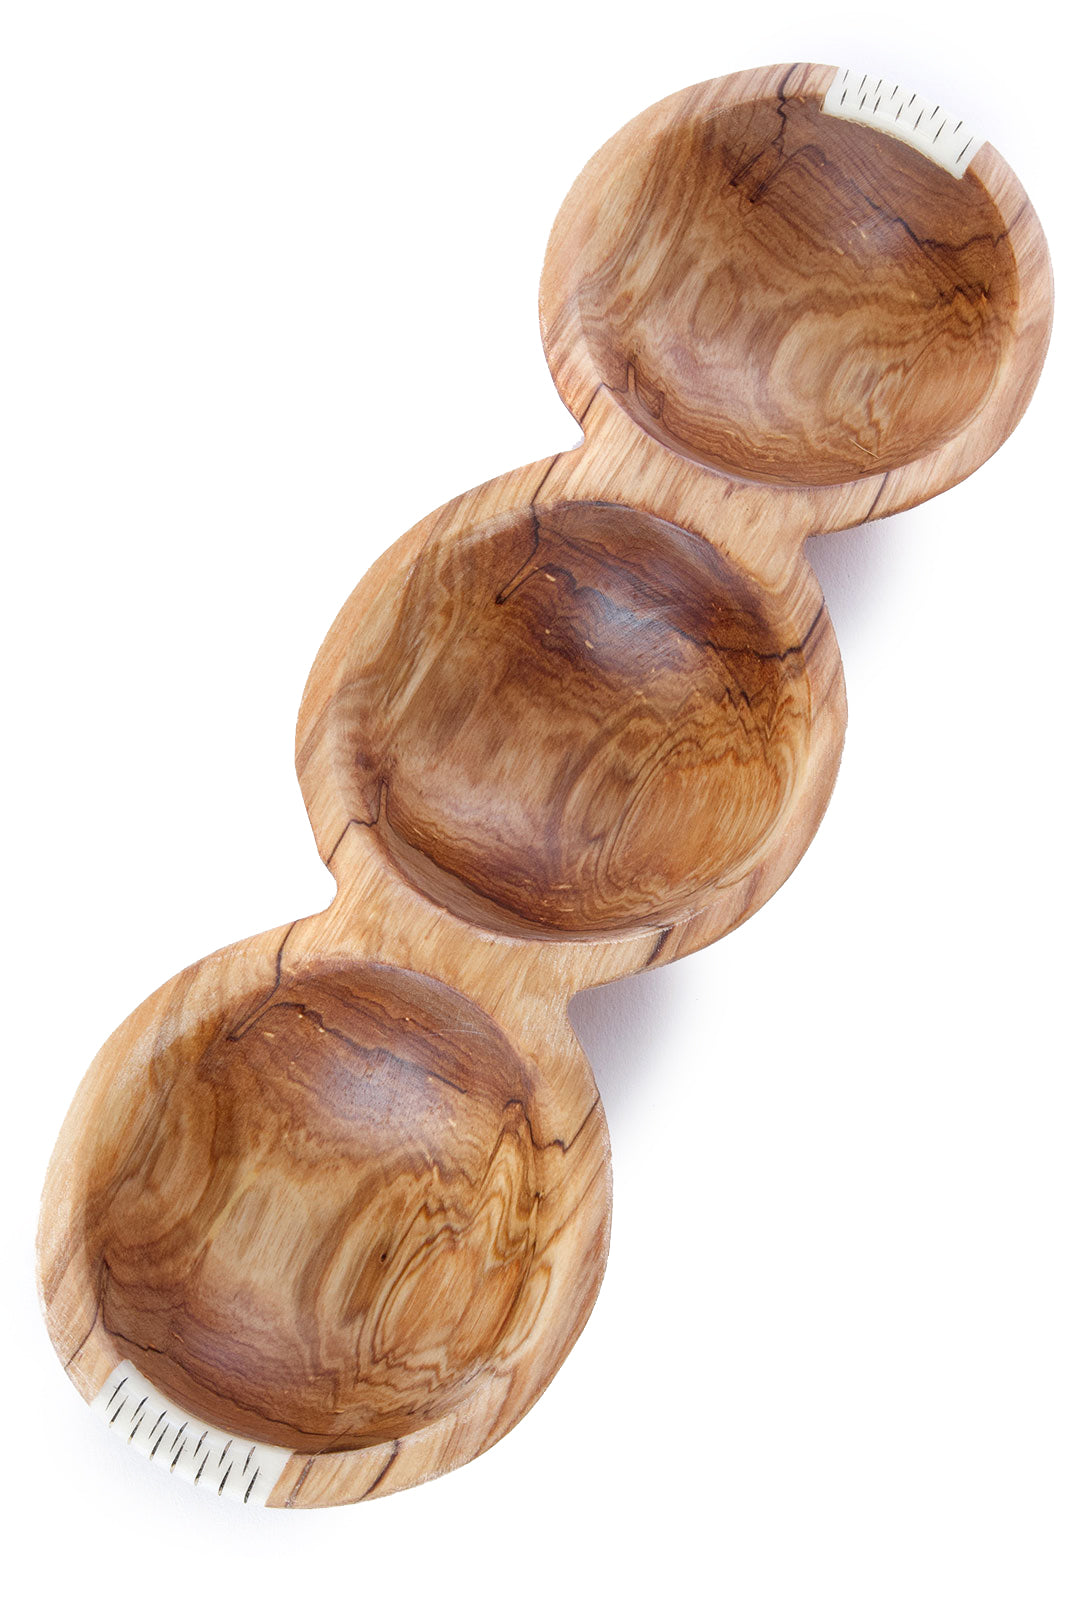 Olive Wood Triple Well Serving Bowl with Bone Inlay